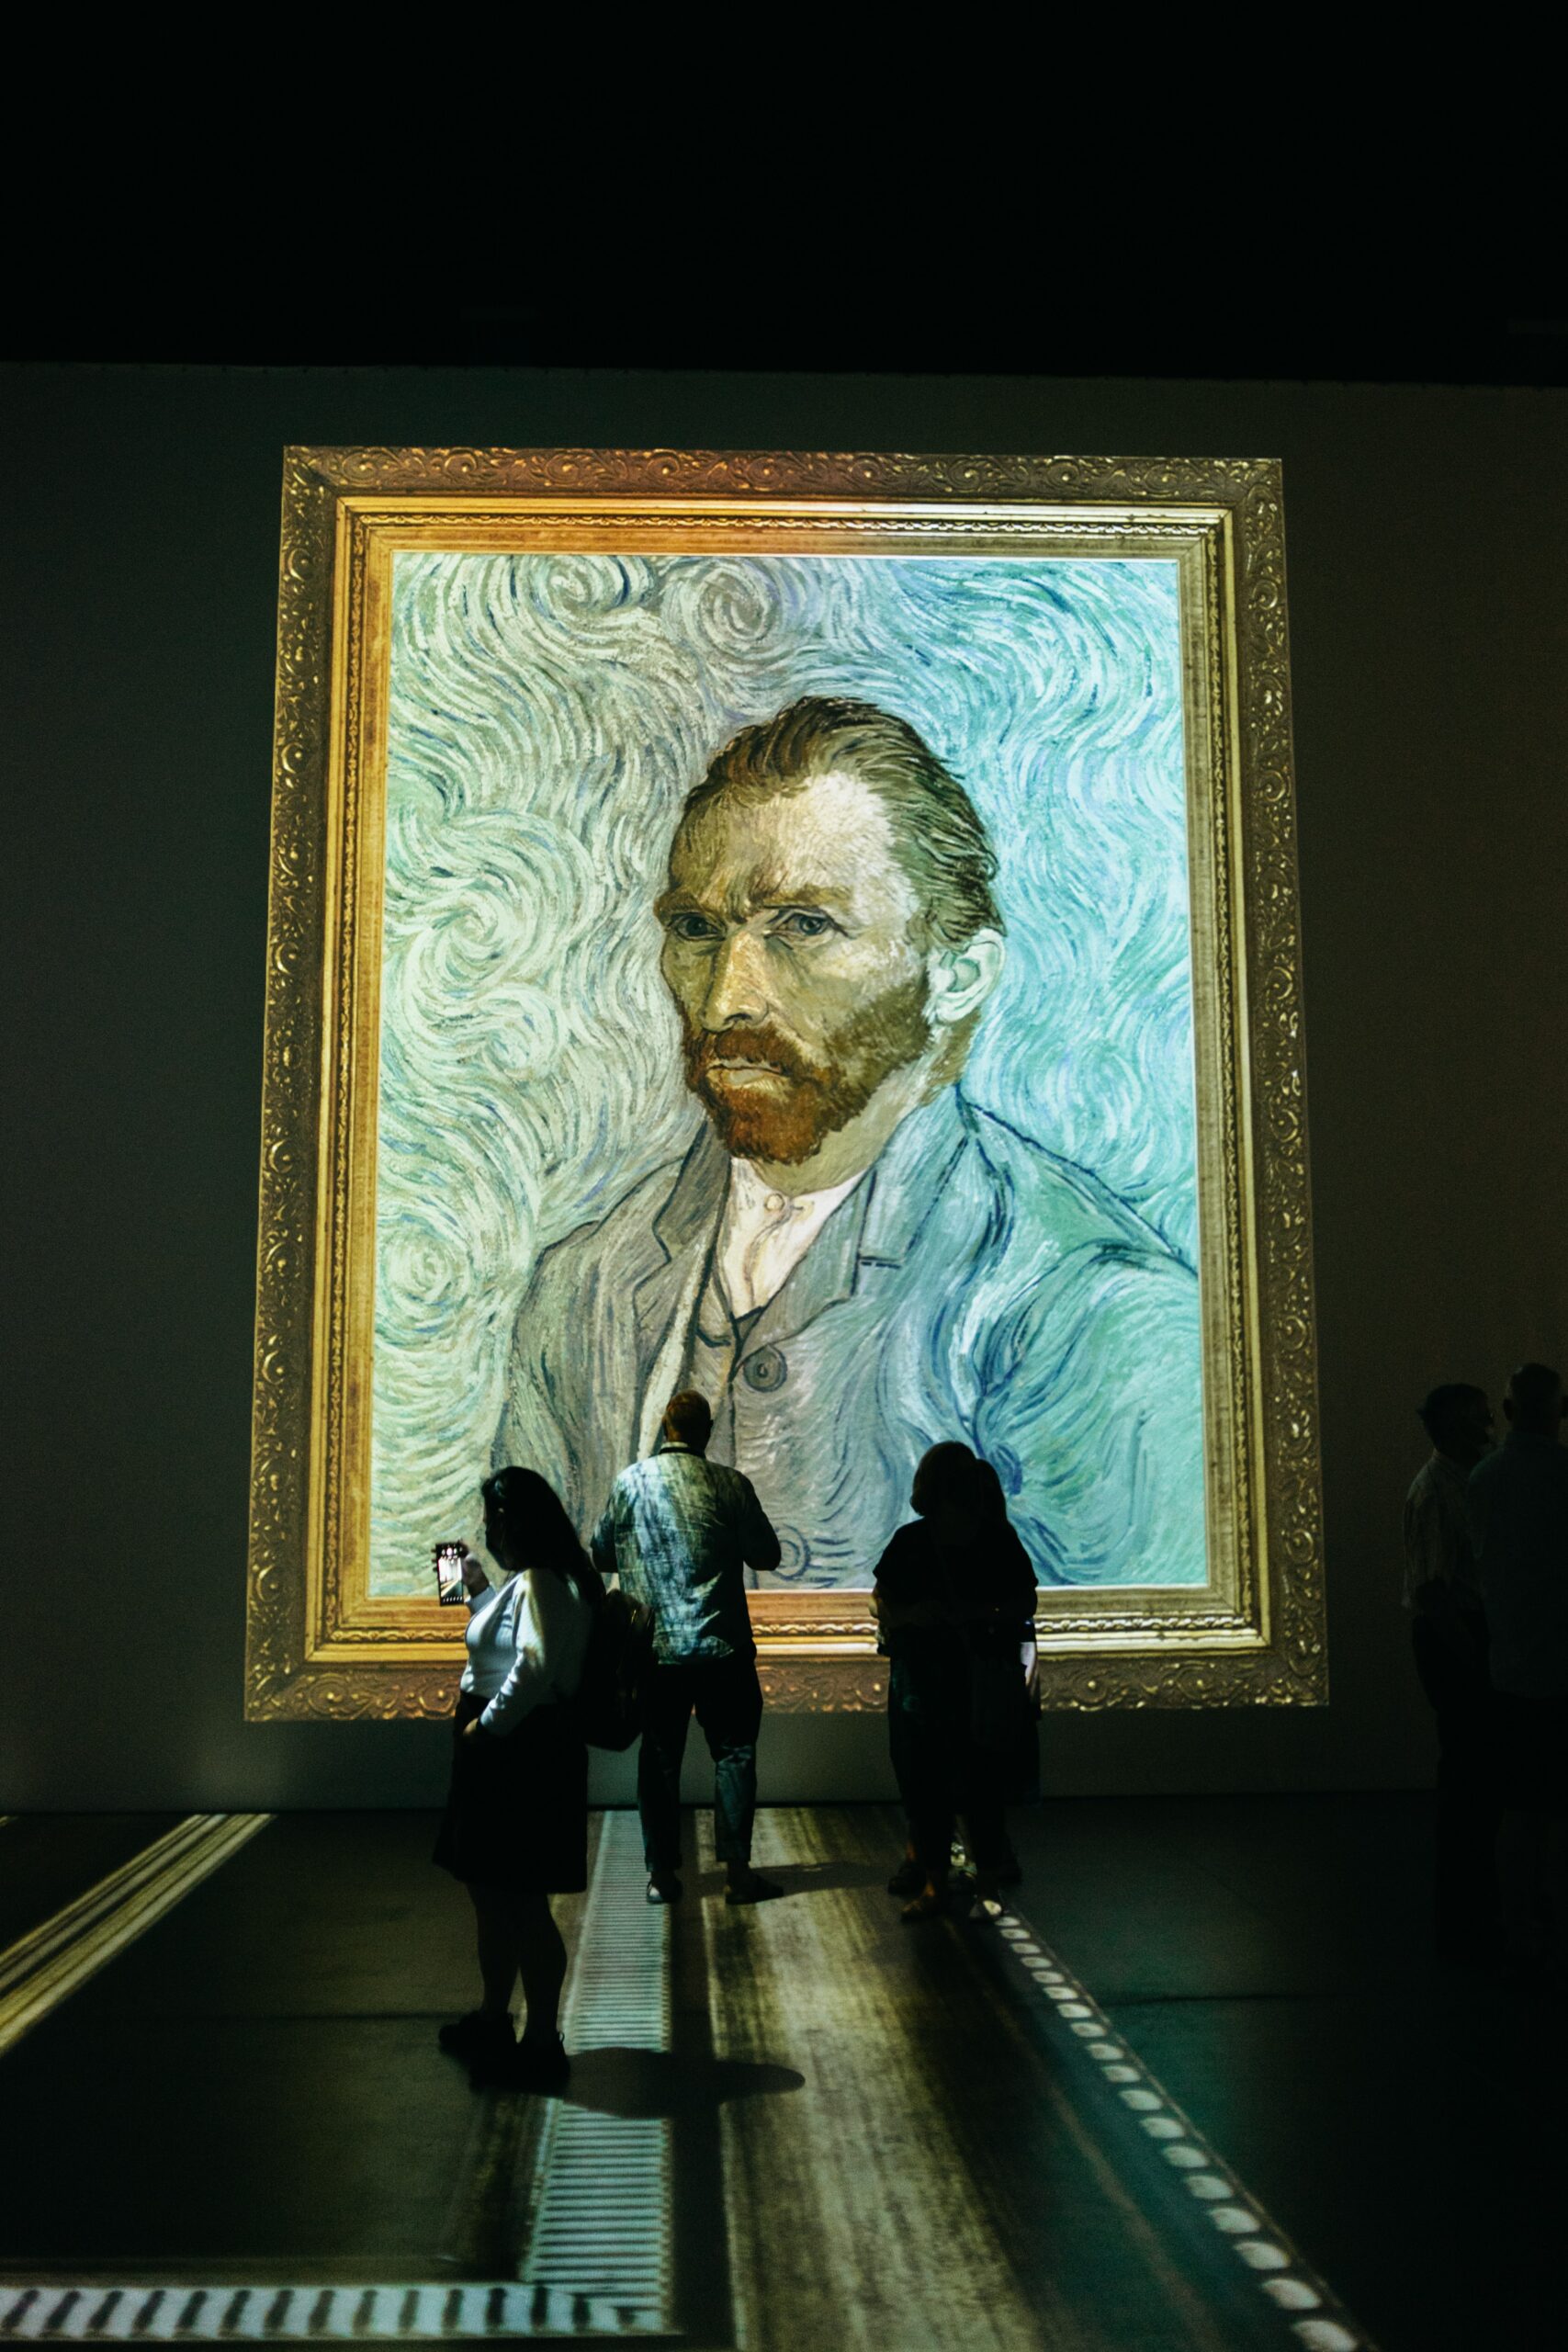 Reflections on the Immersive Van Gogh Experience